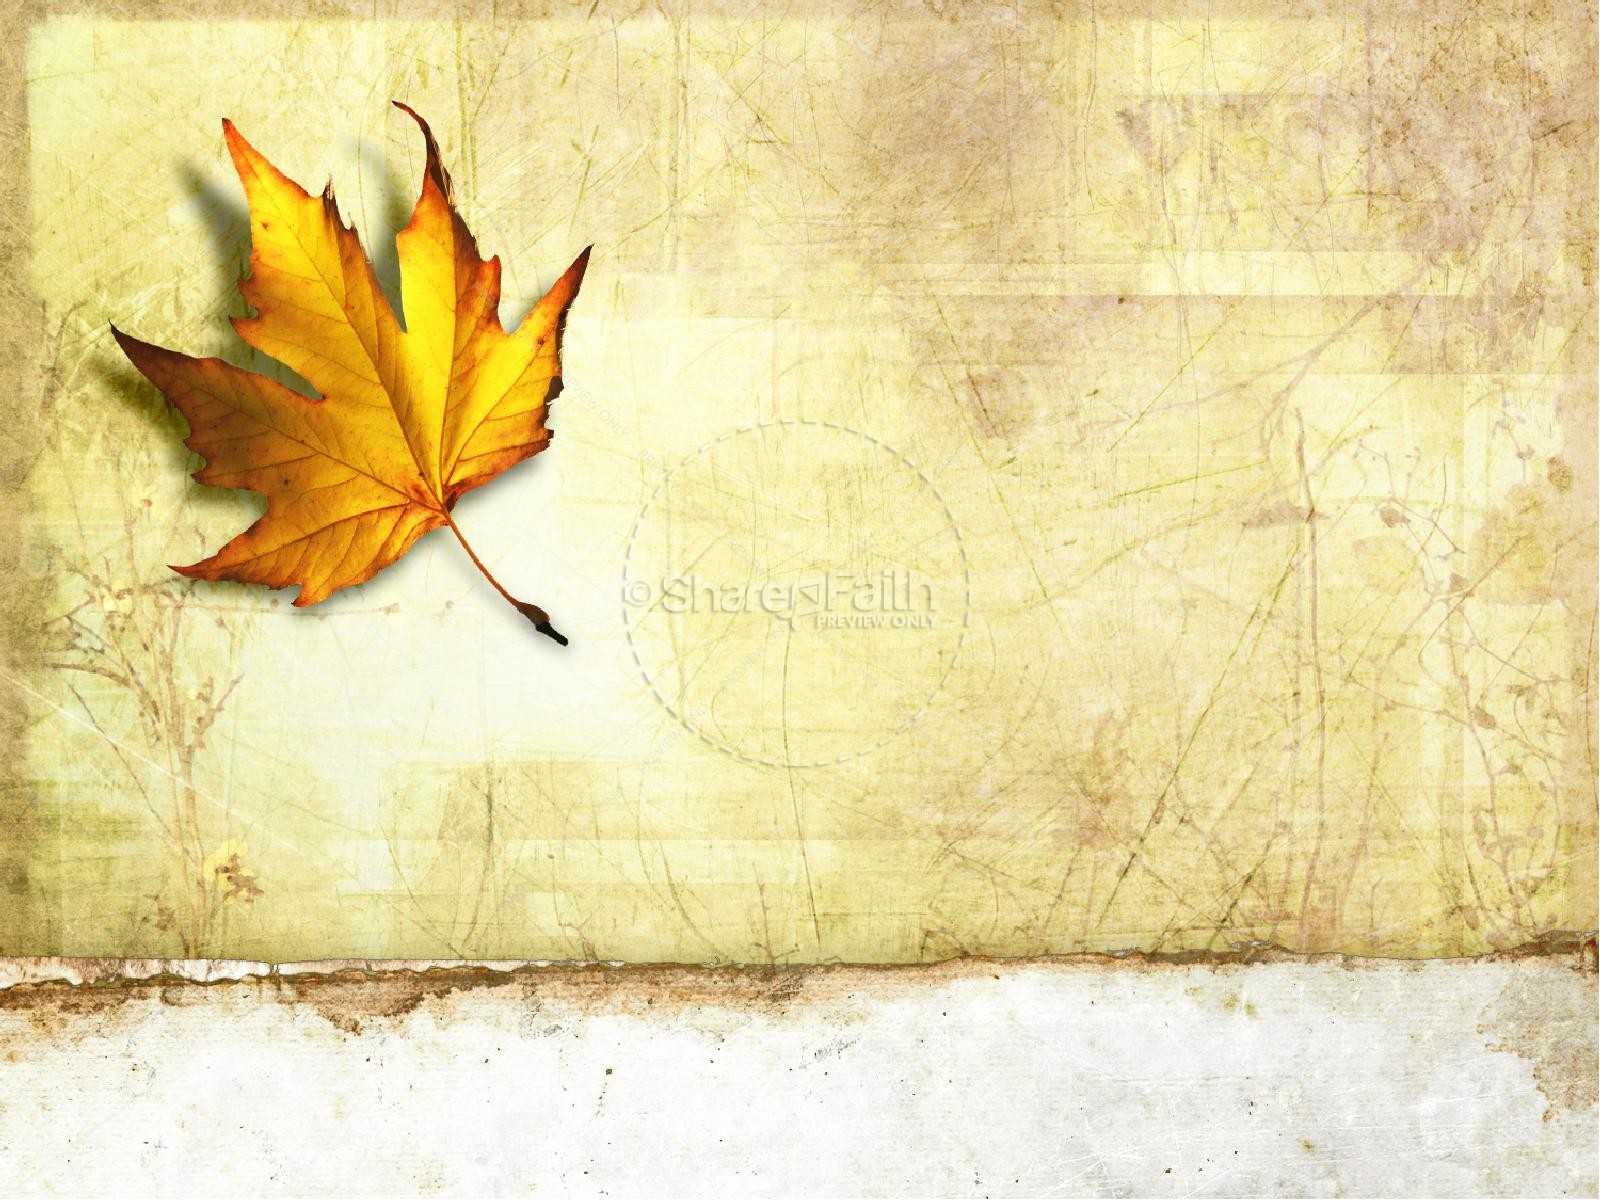 Autumn Powerpoint Template - Zohre.horizonconsulting.co Within Free Fall Powerpoint Templates